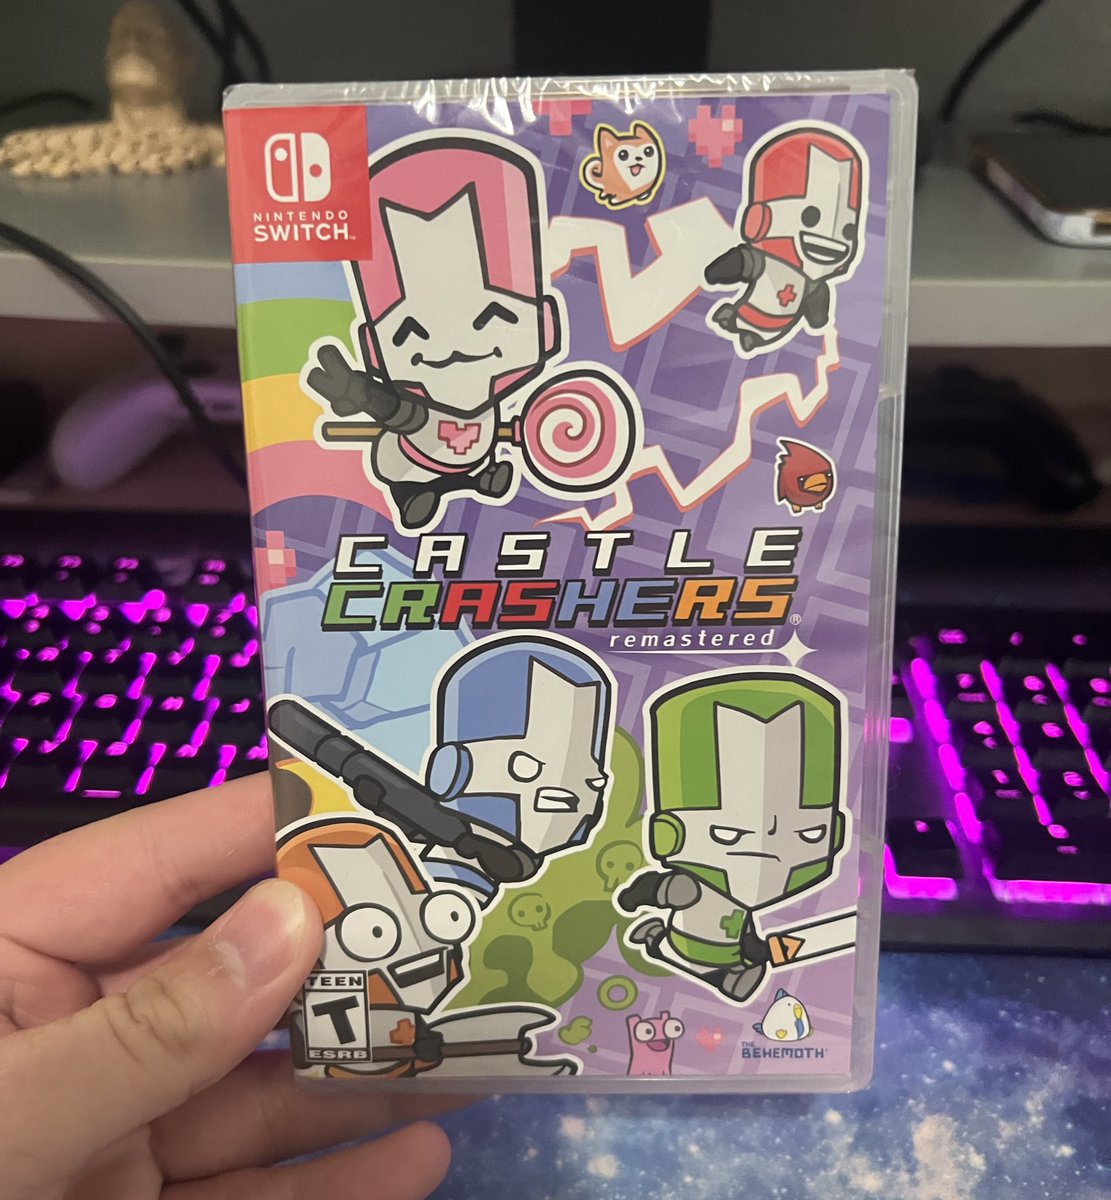 Castle Crashers Remastered physical arriving to save my sanity today.